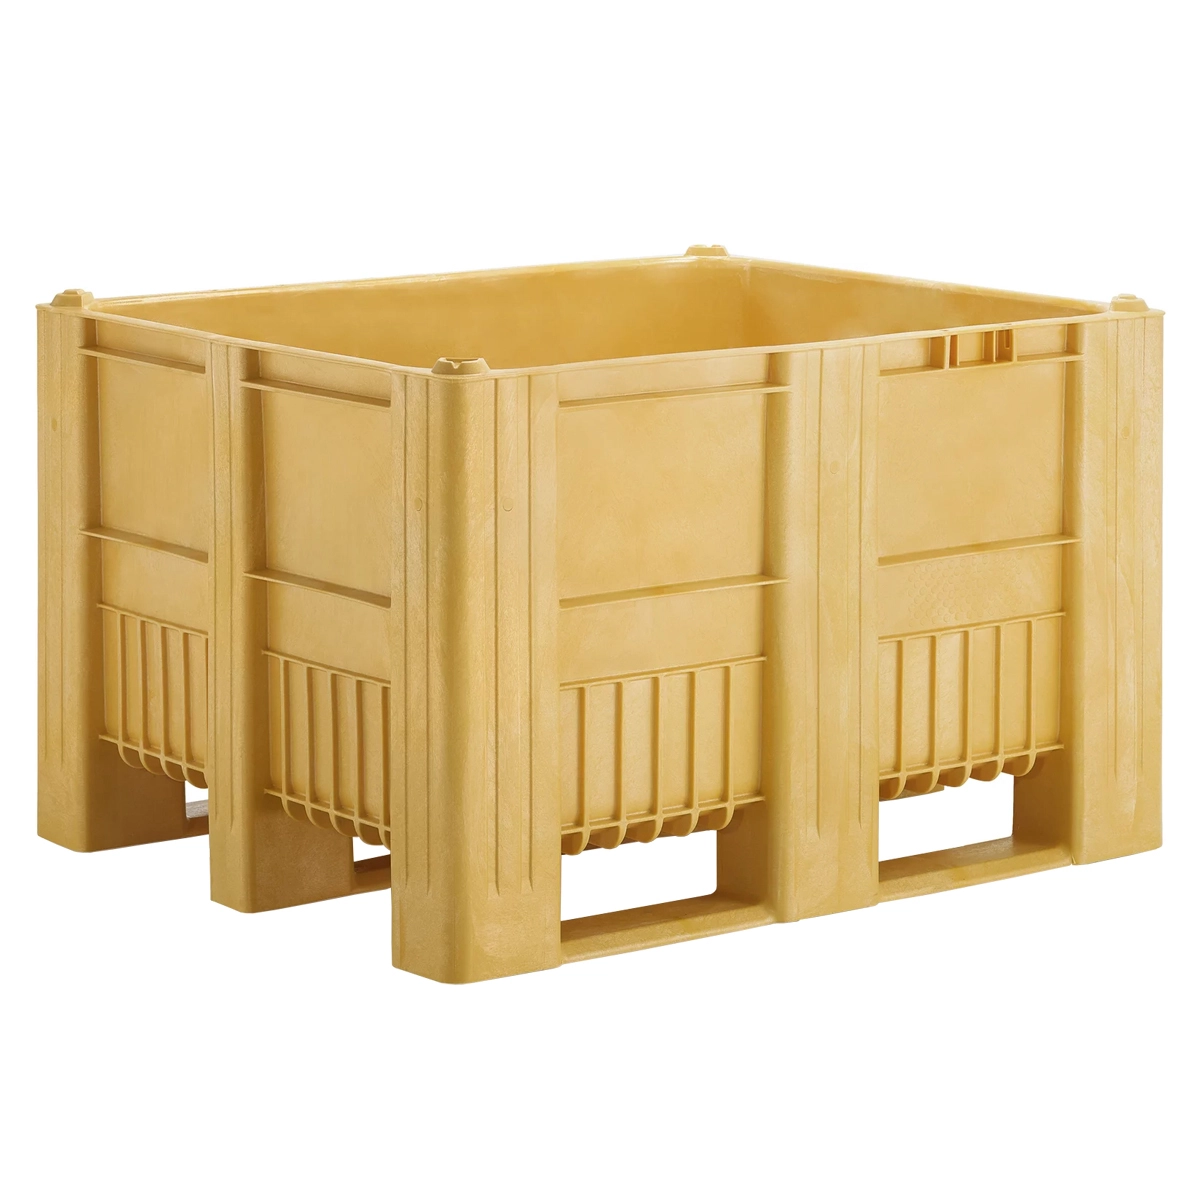 Solid Sided Yellow Dolav Pallet Box